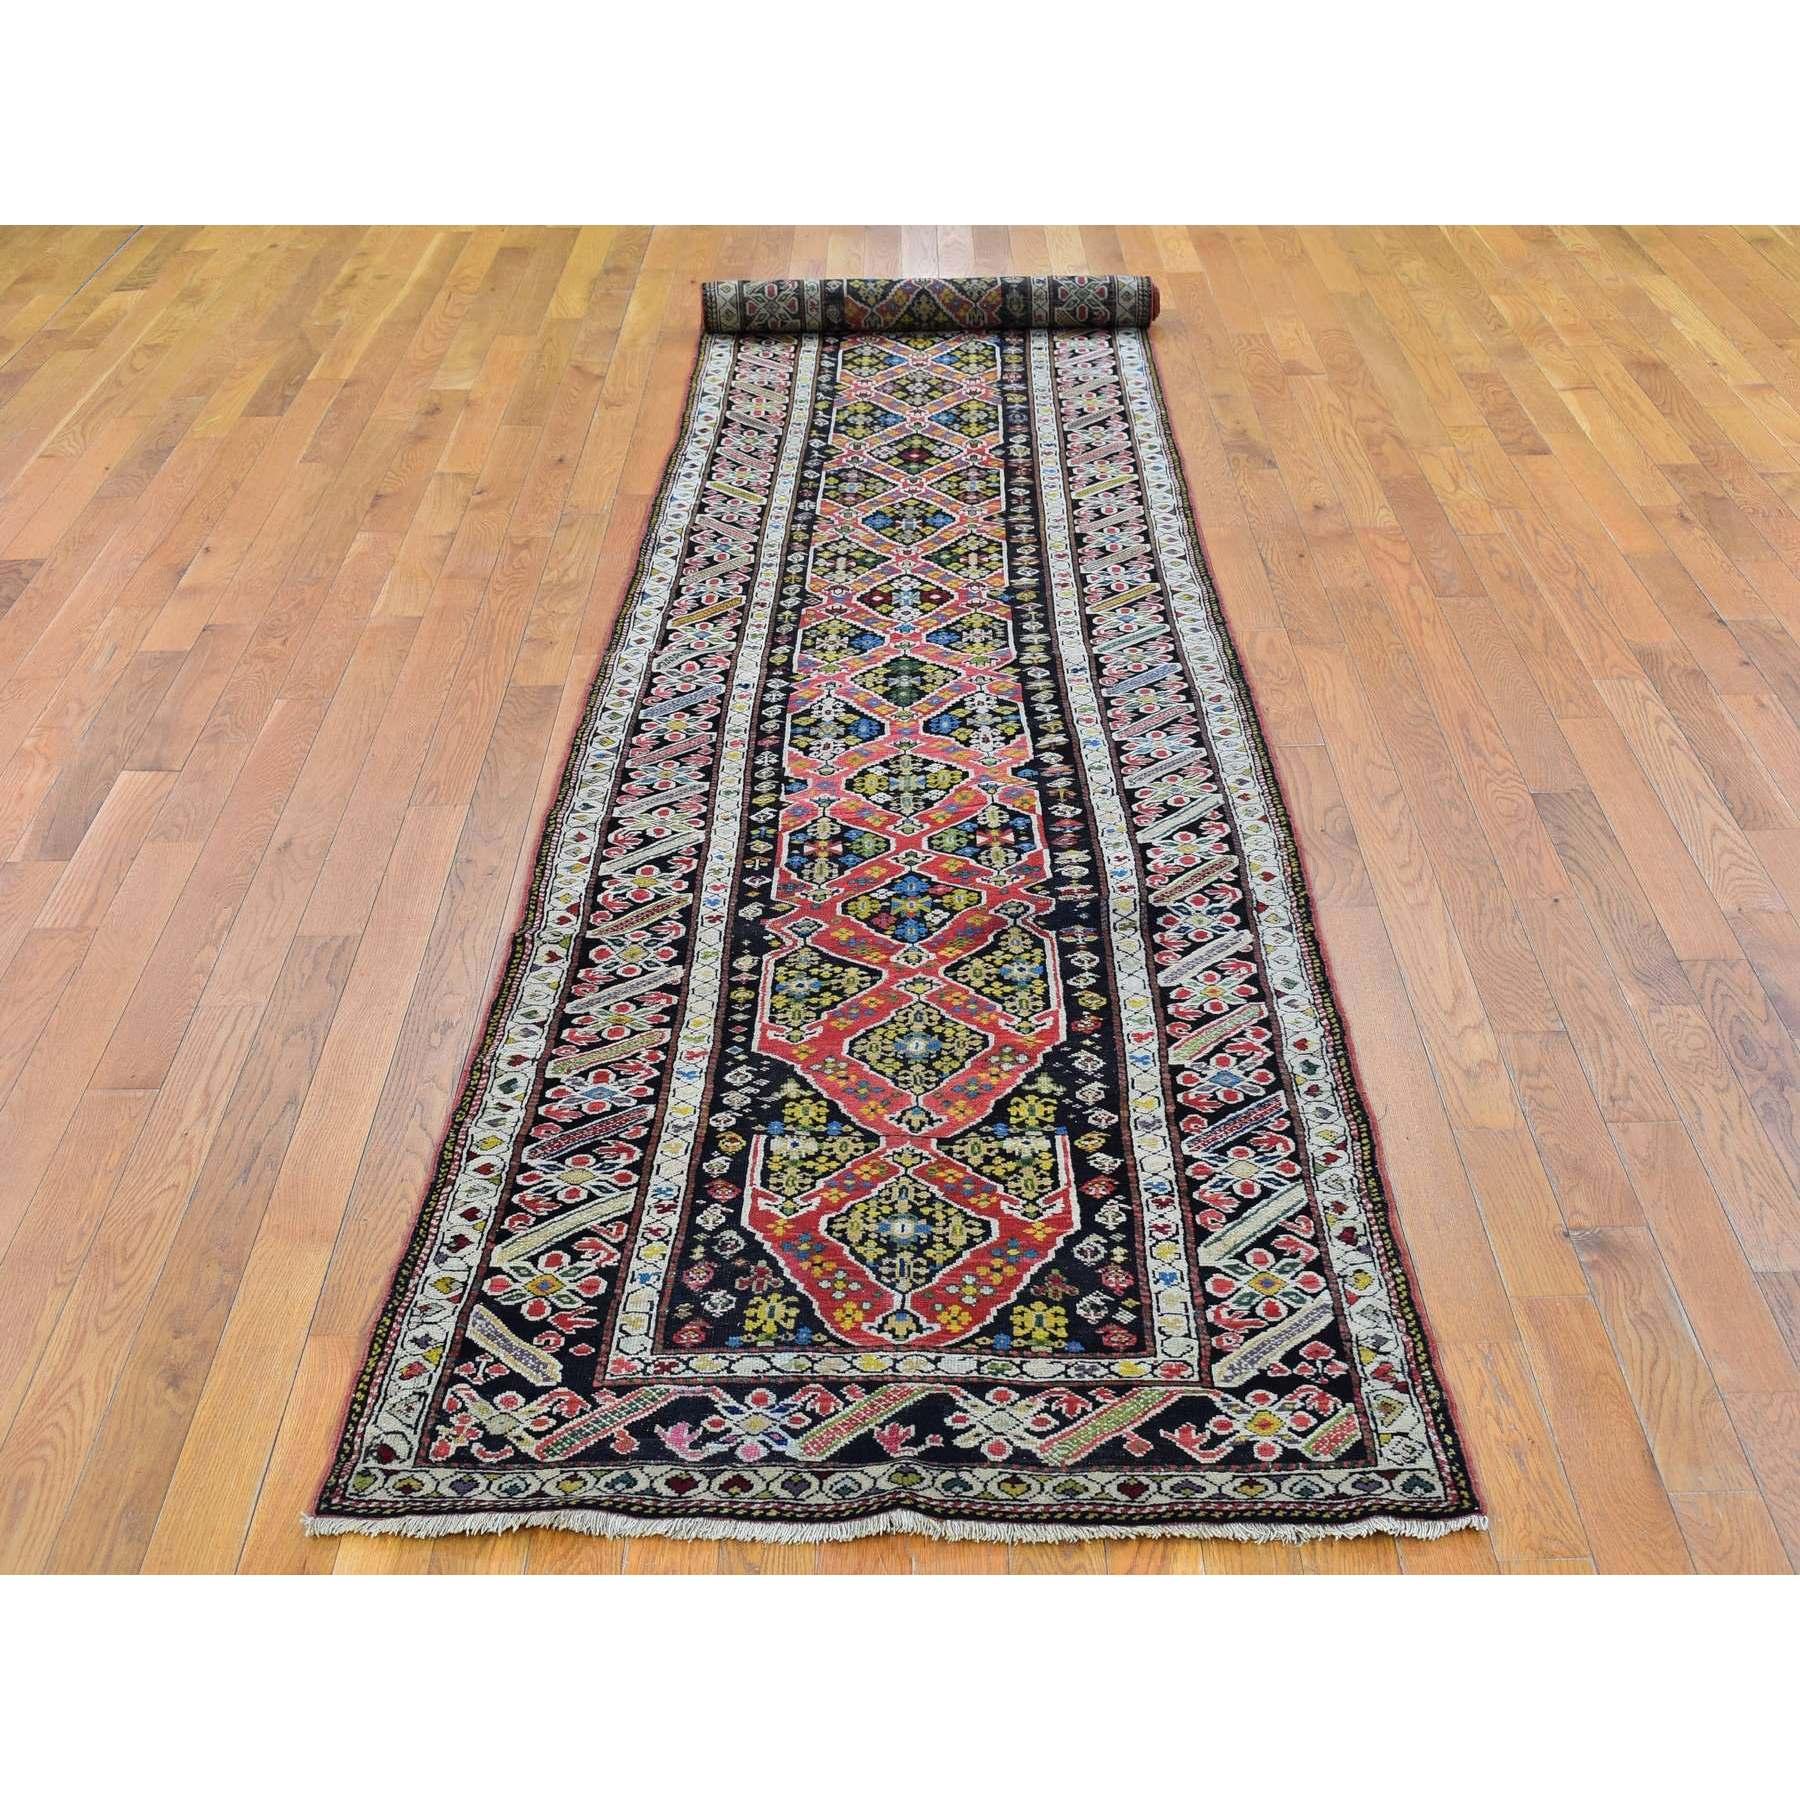 This fabulous hand-knotted carpet has been created and designed for extra strength and durability. This rug has been handcrafted for weeks in the traditional method that is used to make
Exact Rug Size in Feet and Inches : 3'1